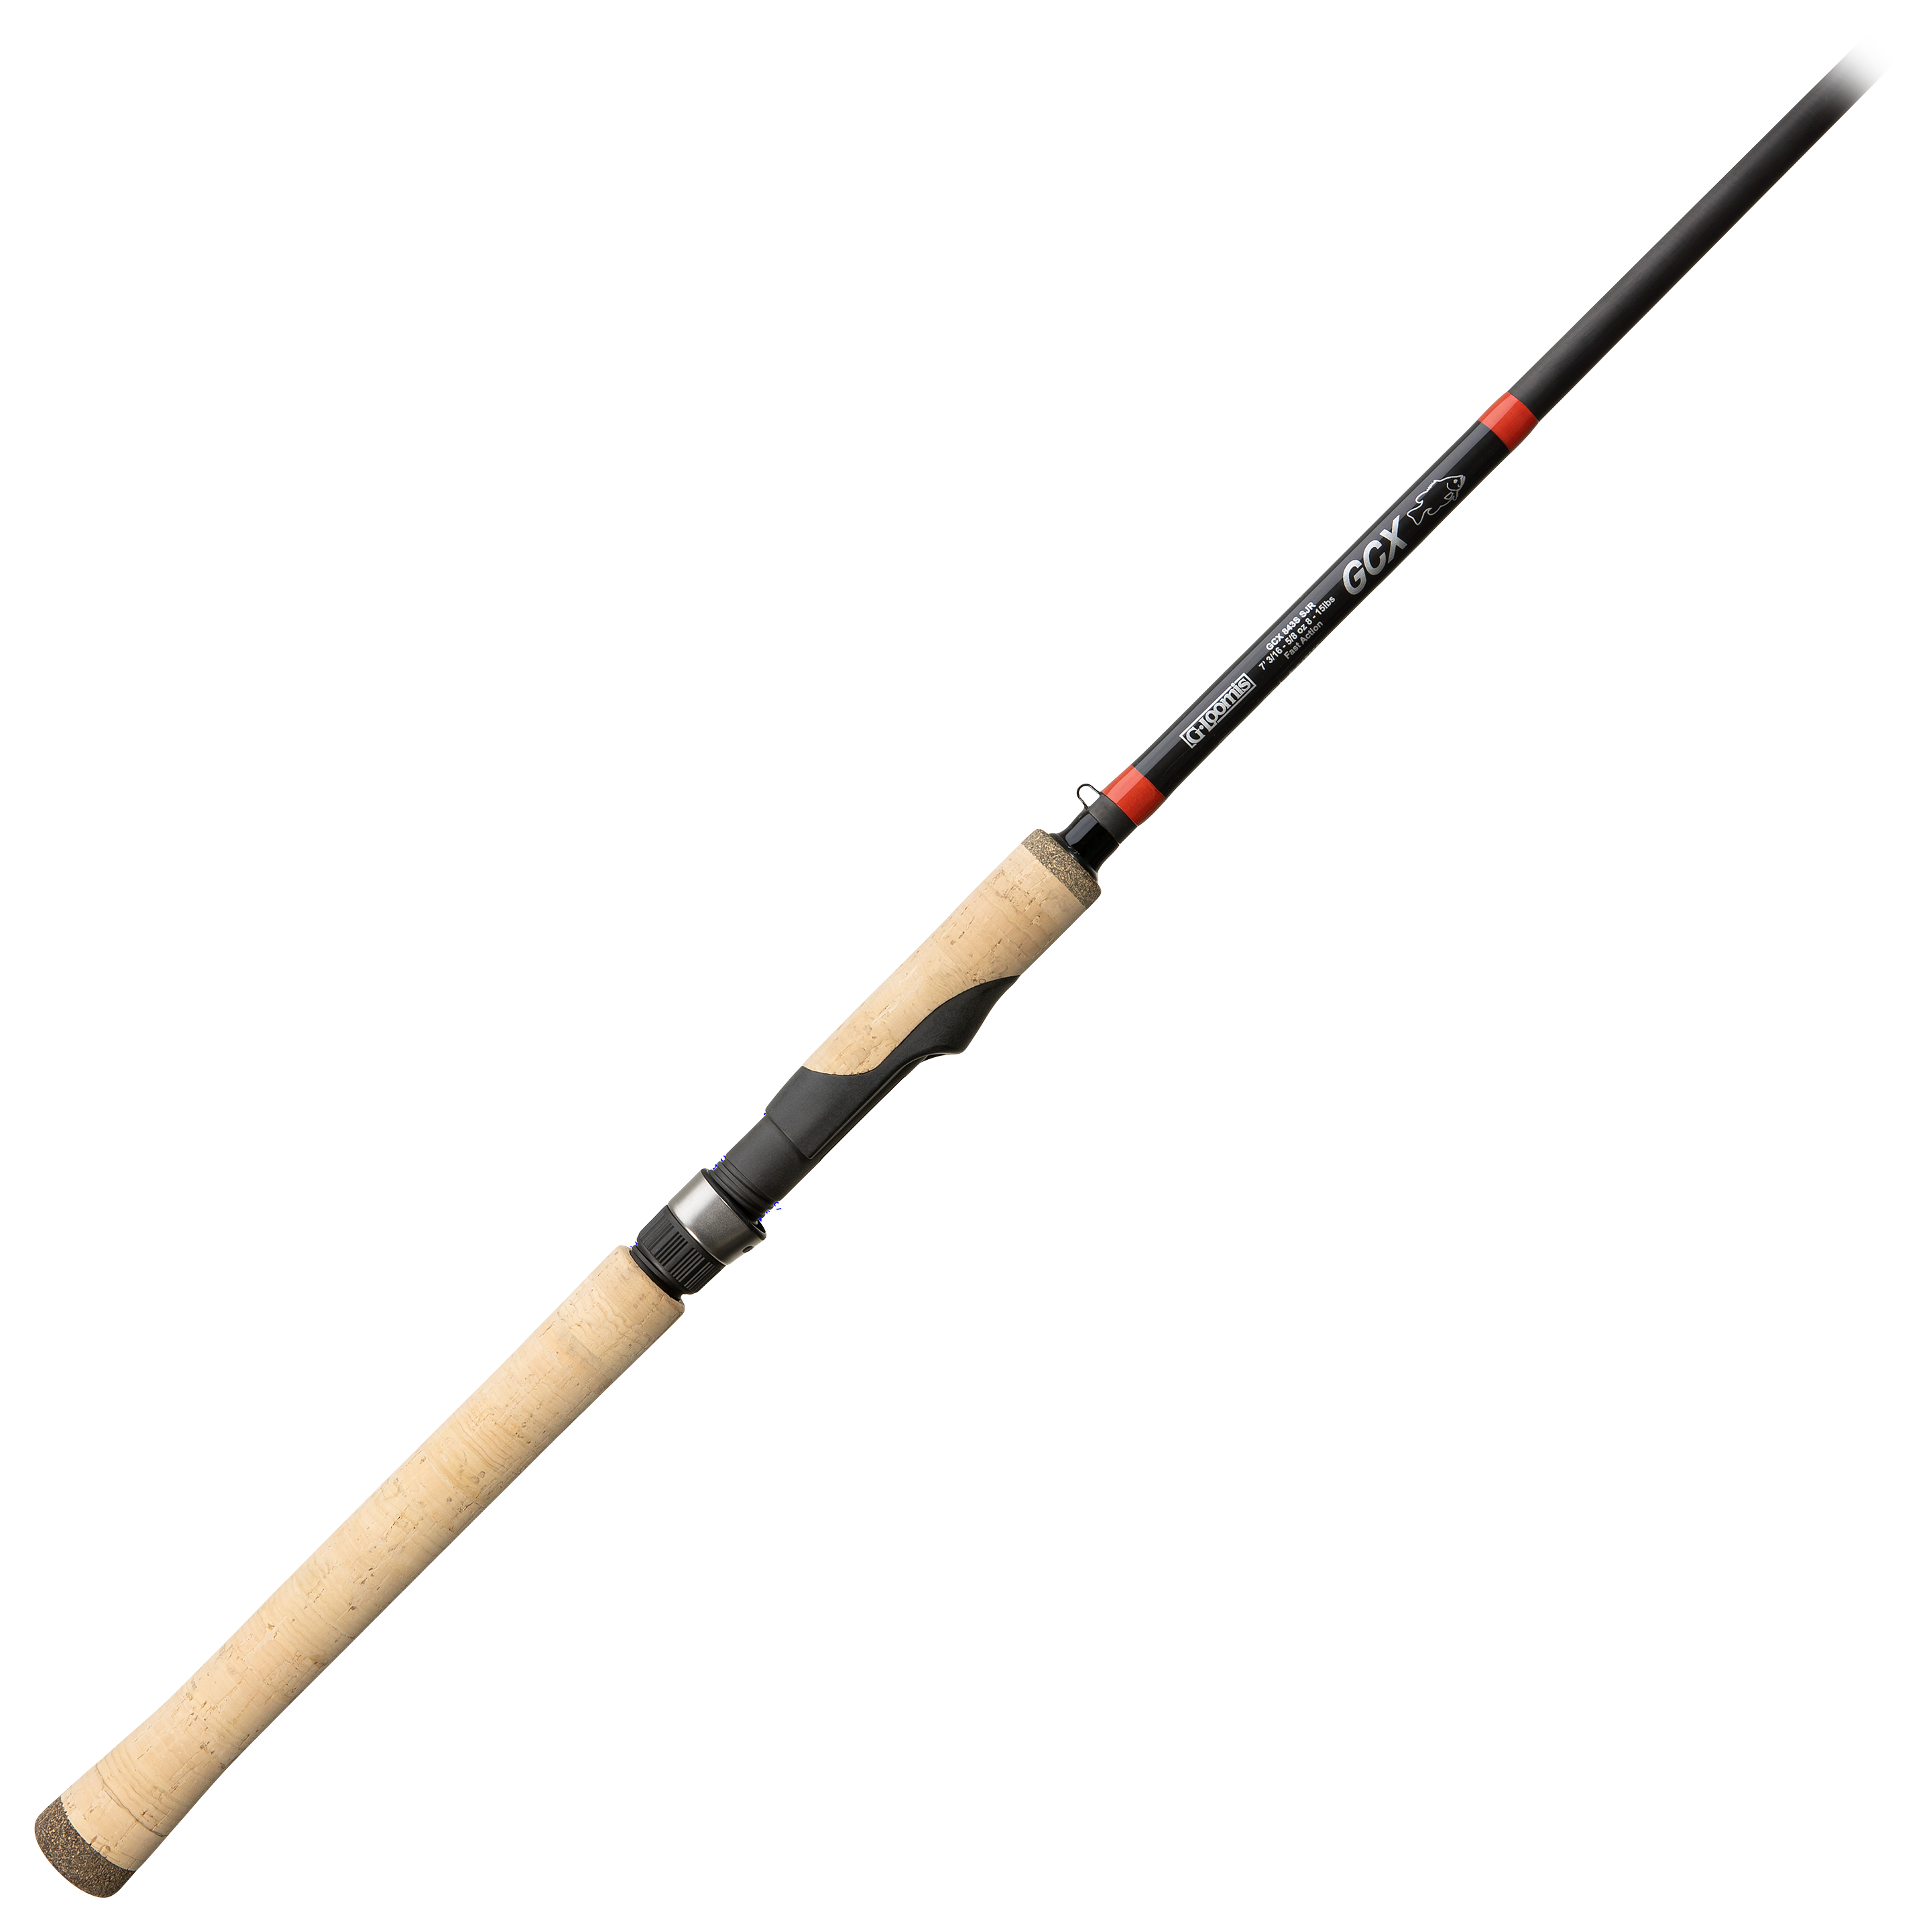 G.Loomis GCX Spin Jig Spinning Rod - Black and Red -  12951-01